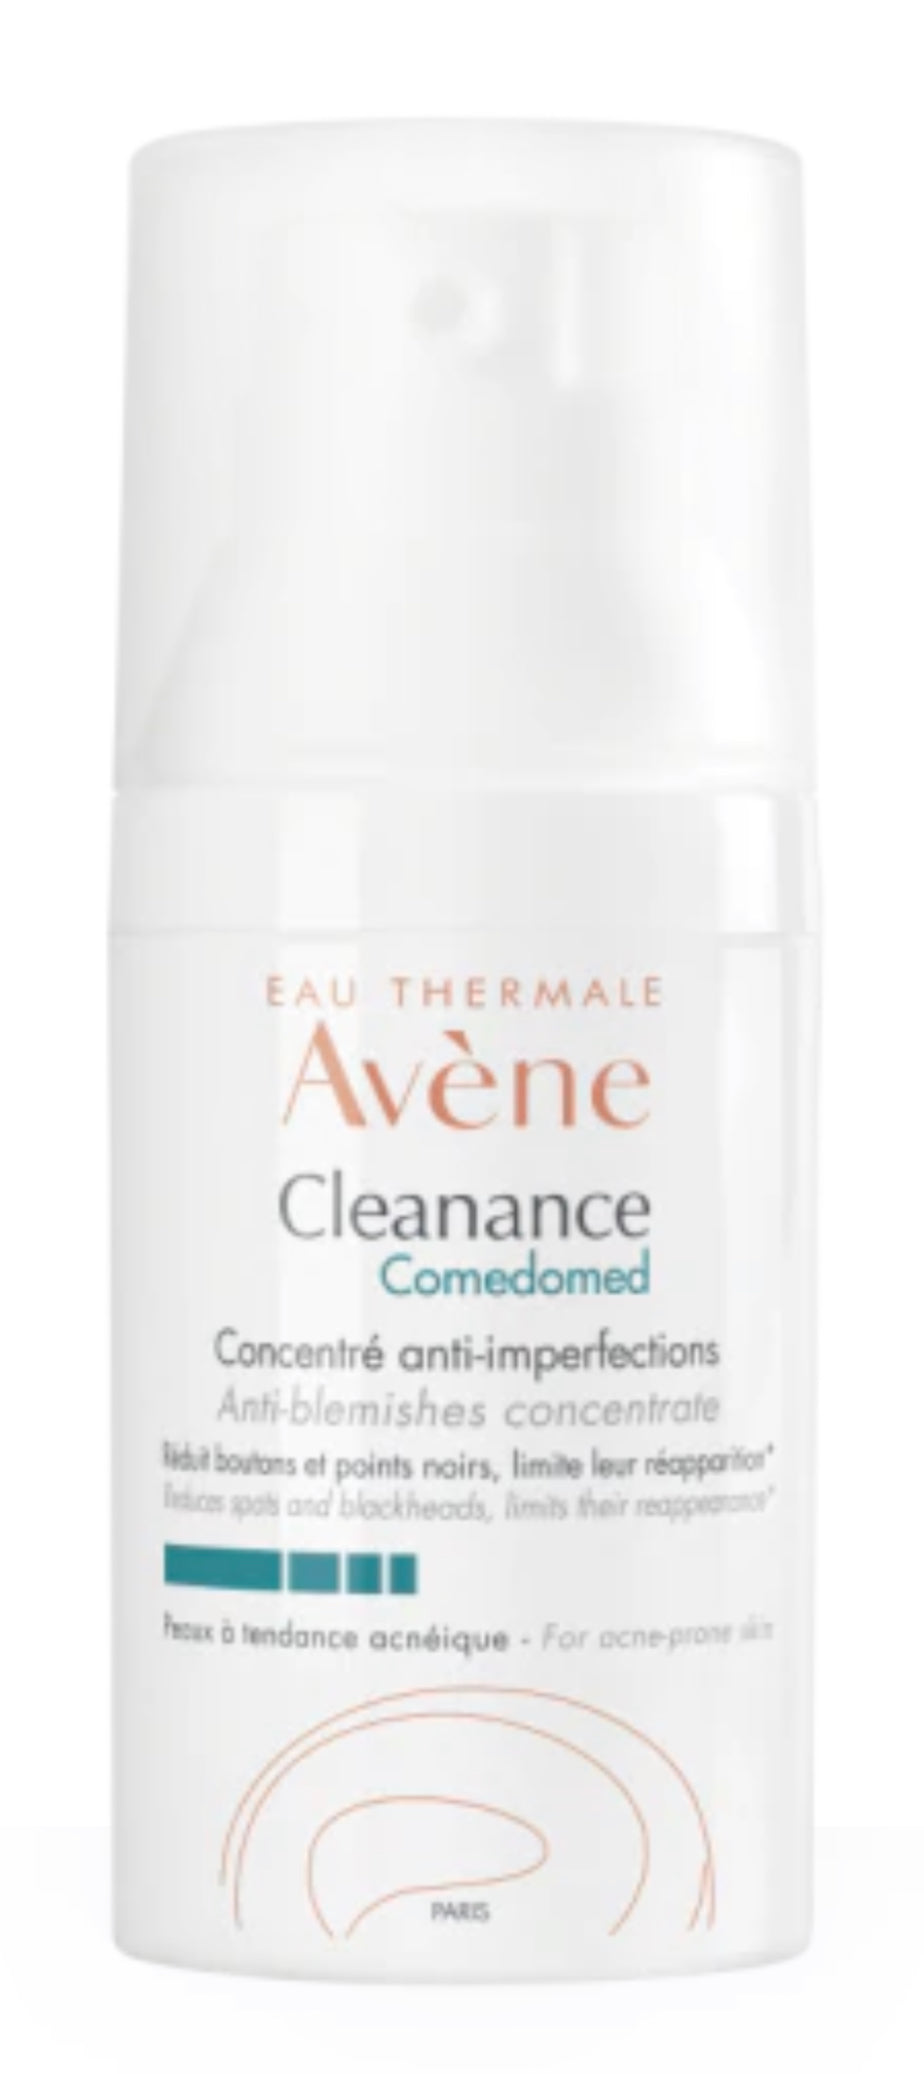 Avene Comedomed Anti-Blemish Concentrate 30ml